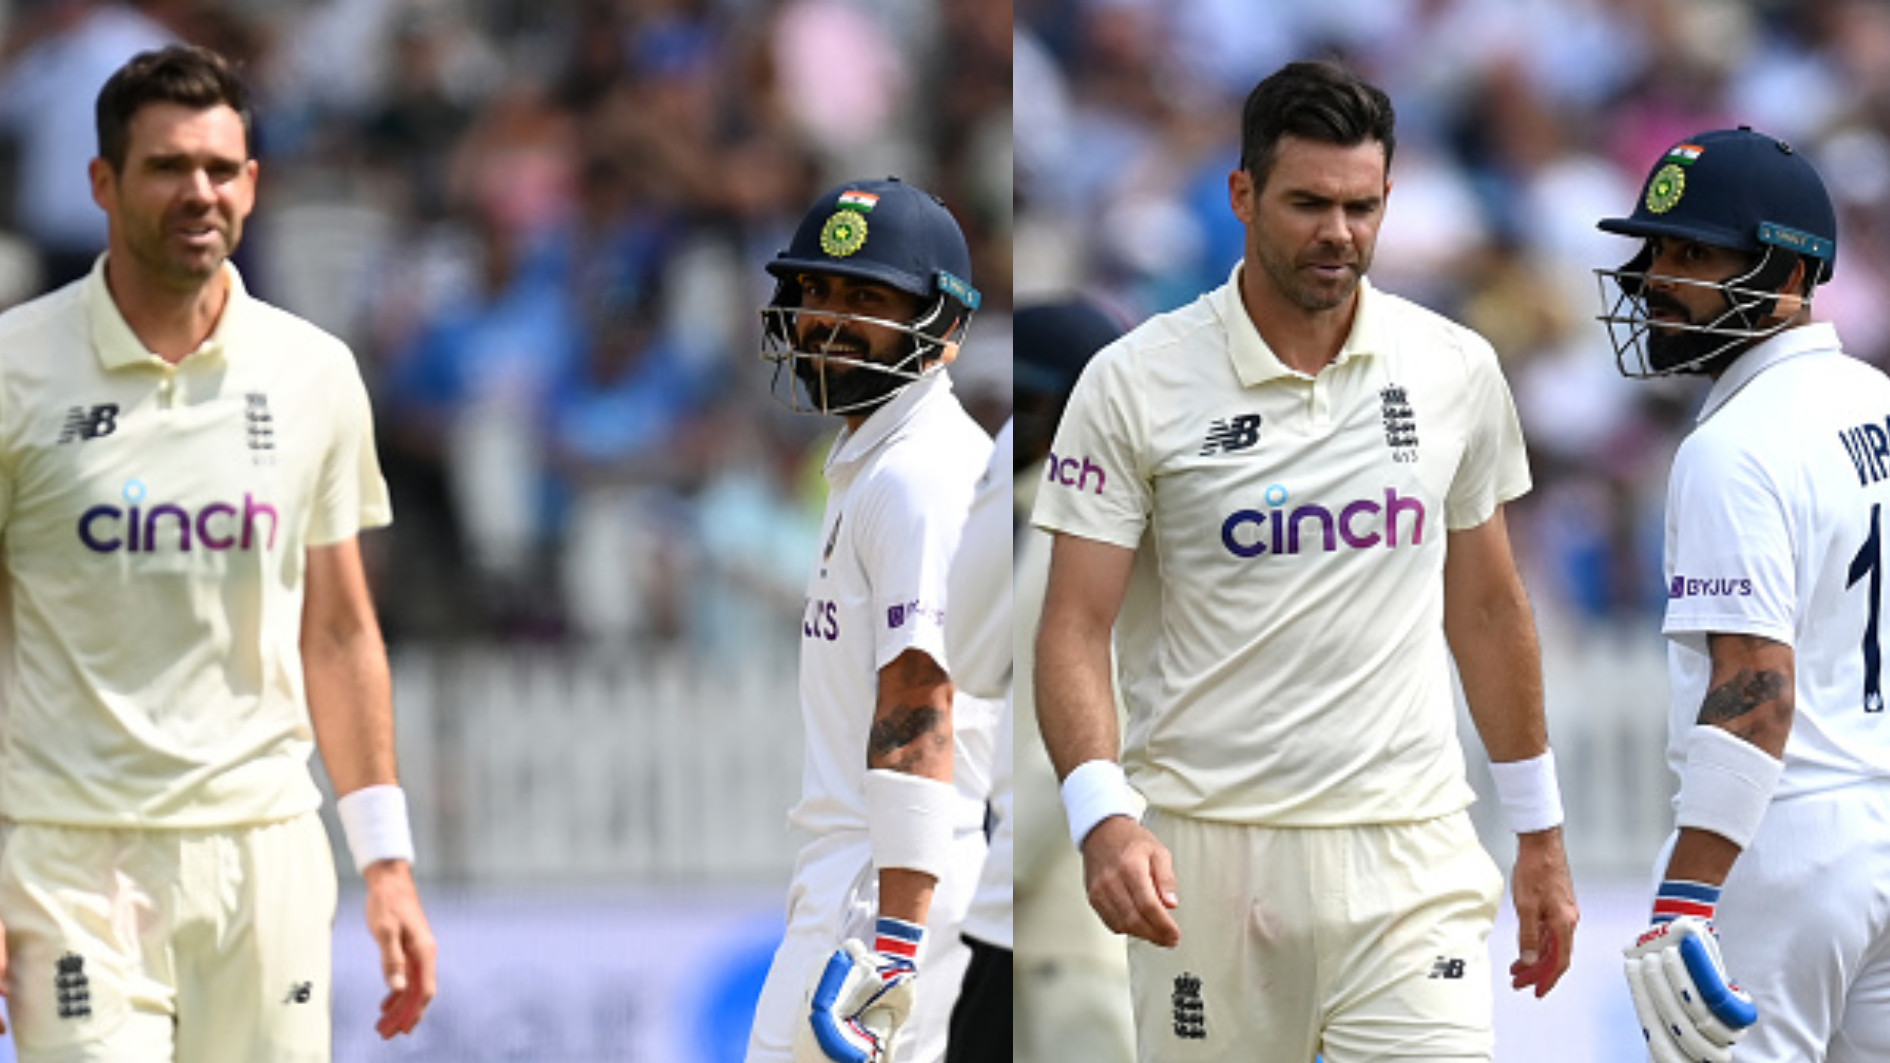 ENG v IND 2021: WATCH - This isn’t your backyard- Virat Kohli goads James Anderson during India's 2nd innings